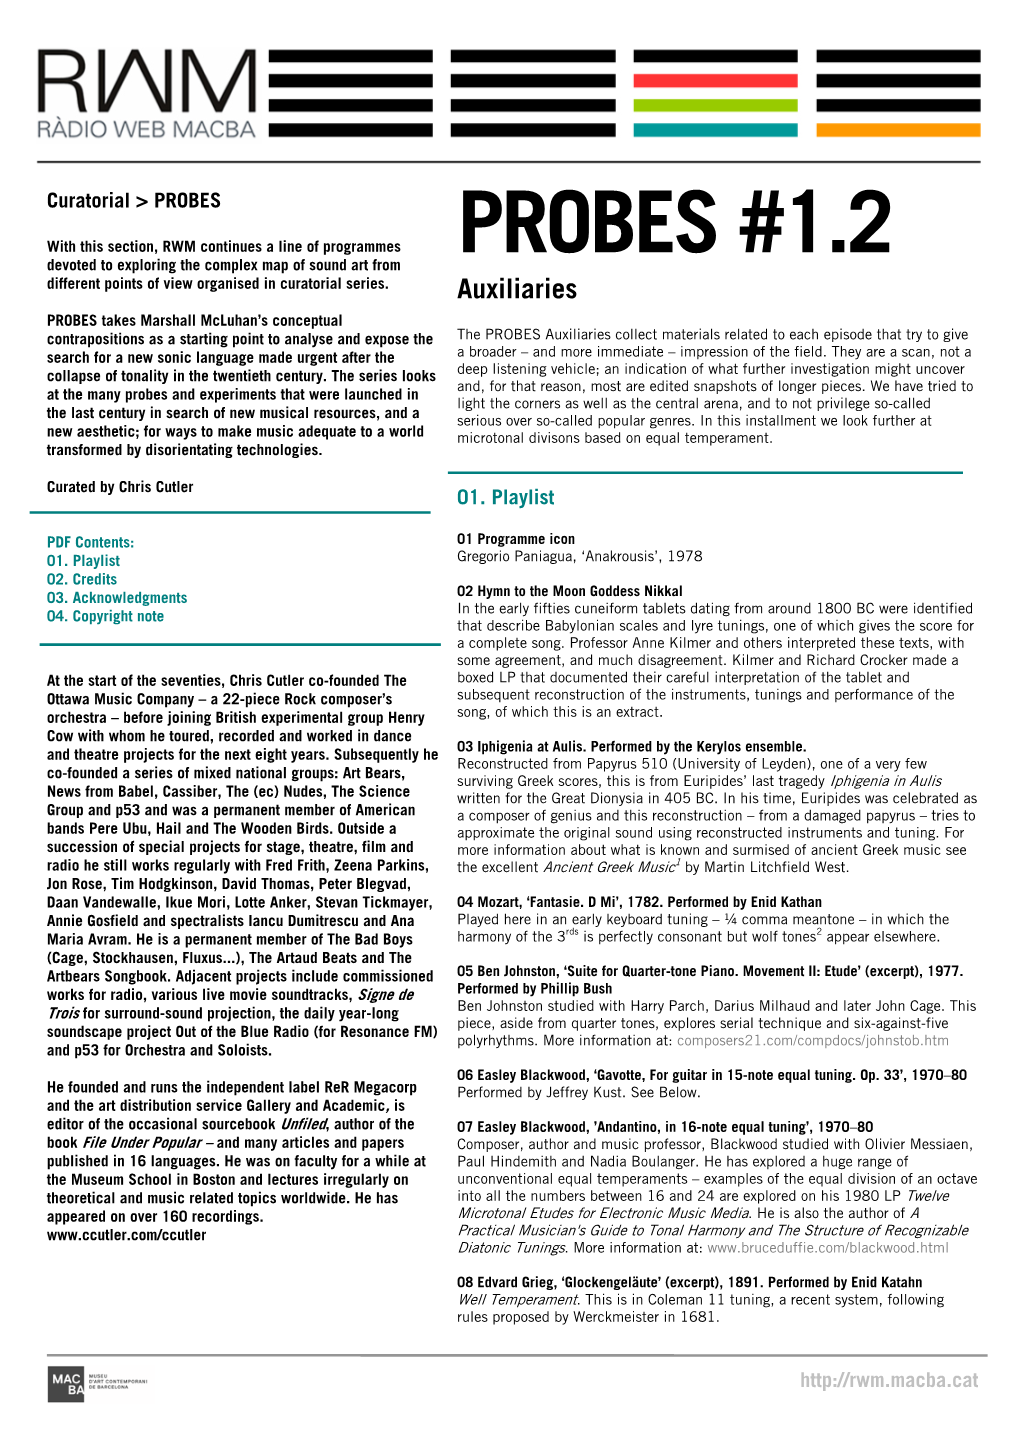 PROBES #1.2 Devoted to Exploring the Complex Map of Sound Art from Different Points of View Organised in Curatorial Series